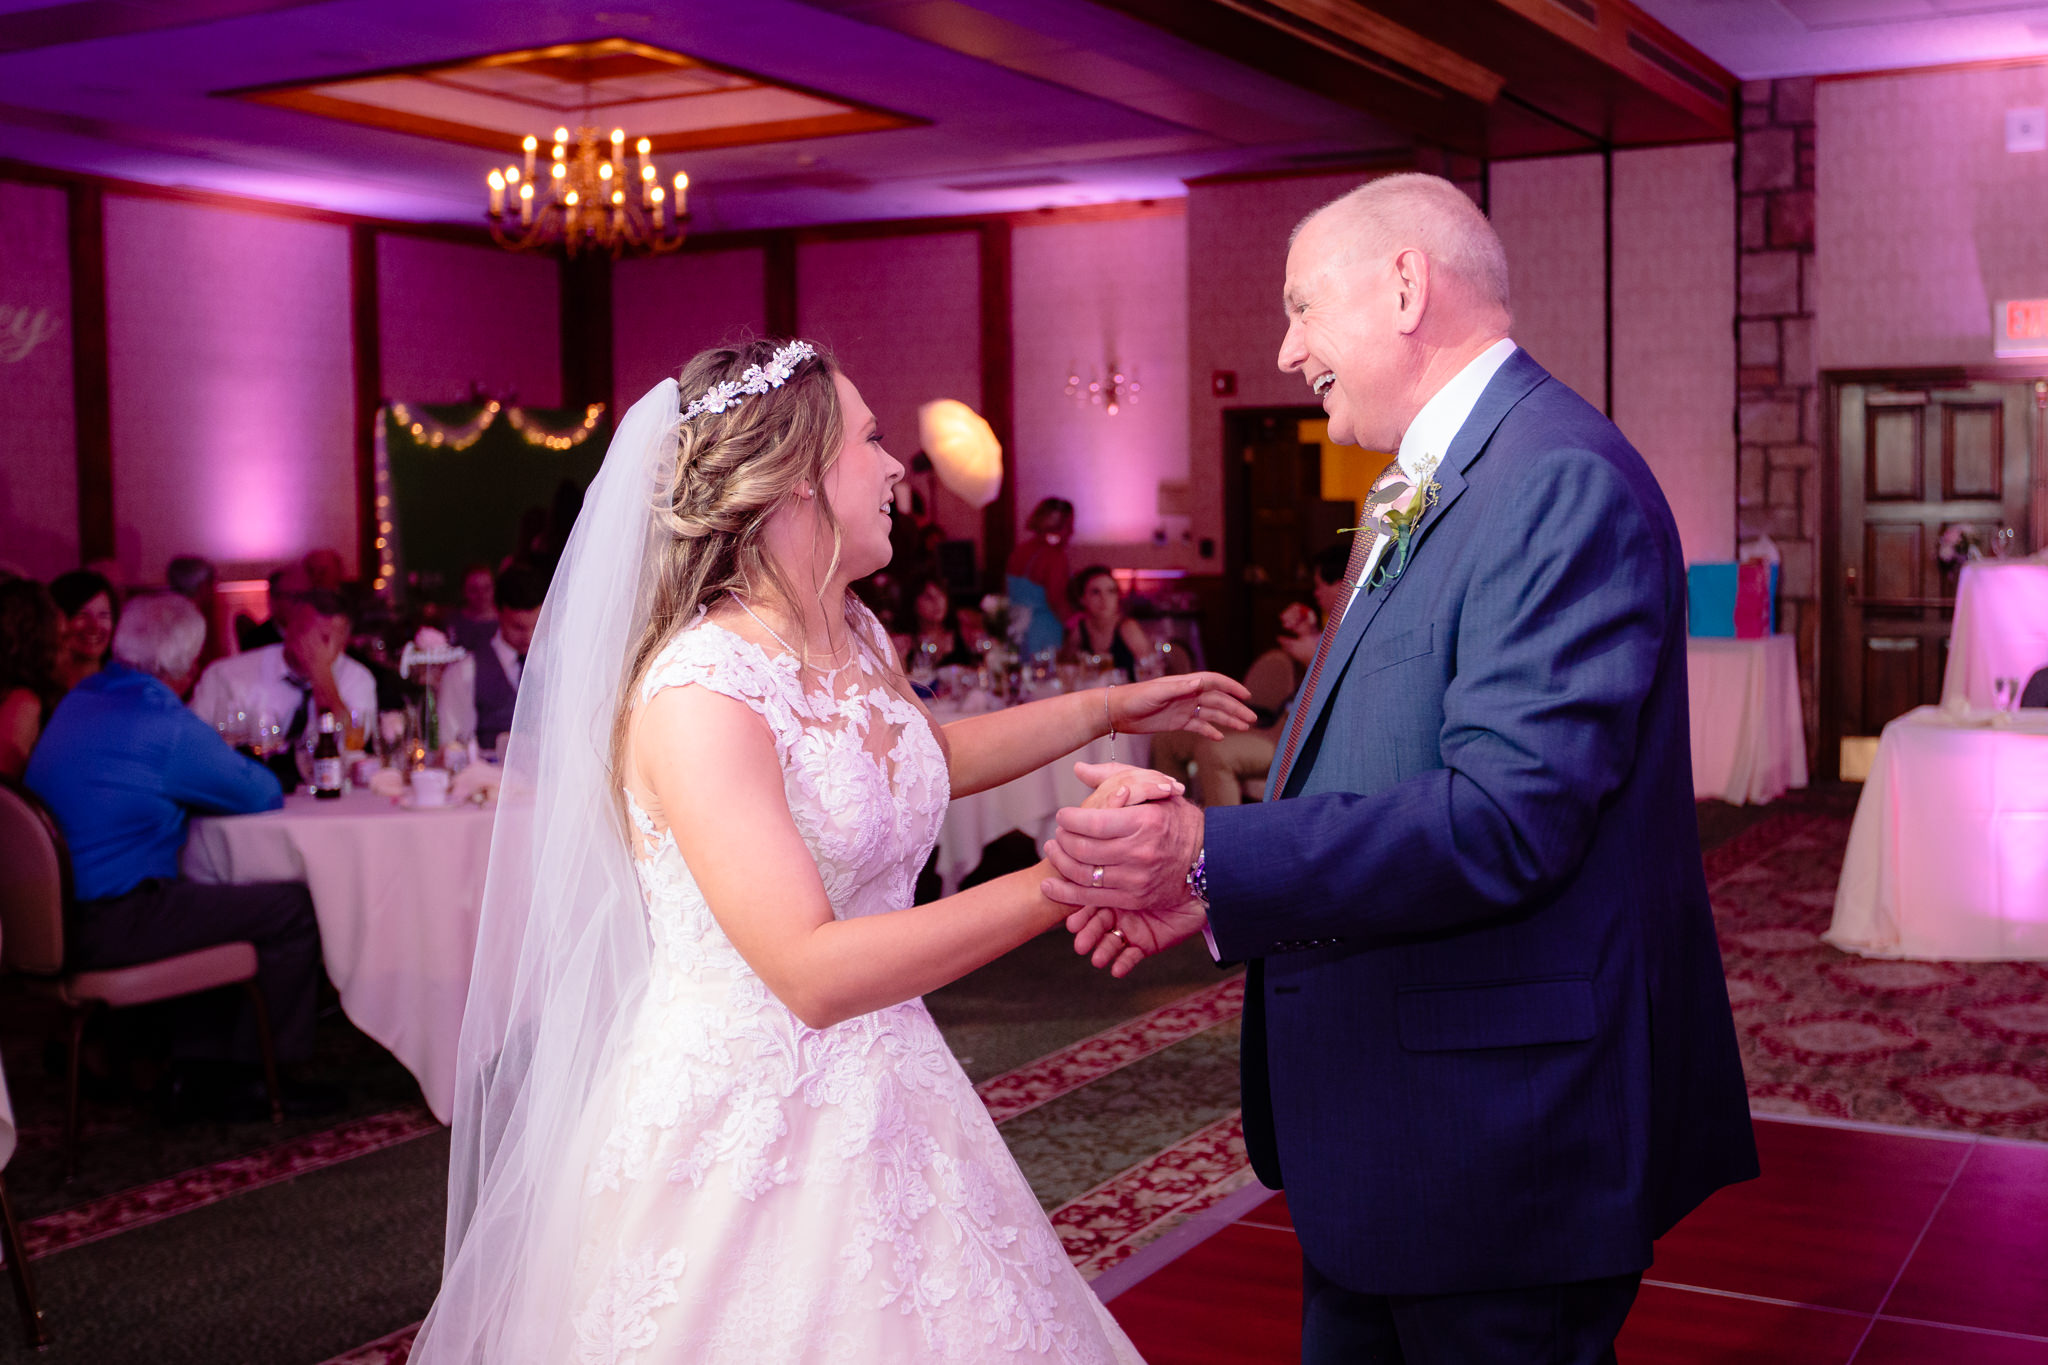 Bride dances with her father-in-law at an Oglebay wedding